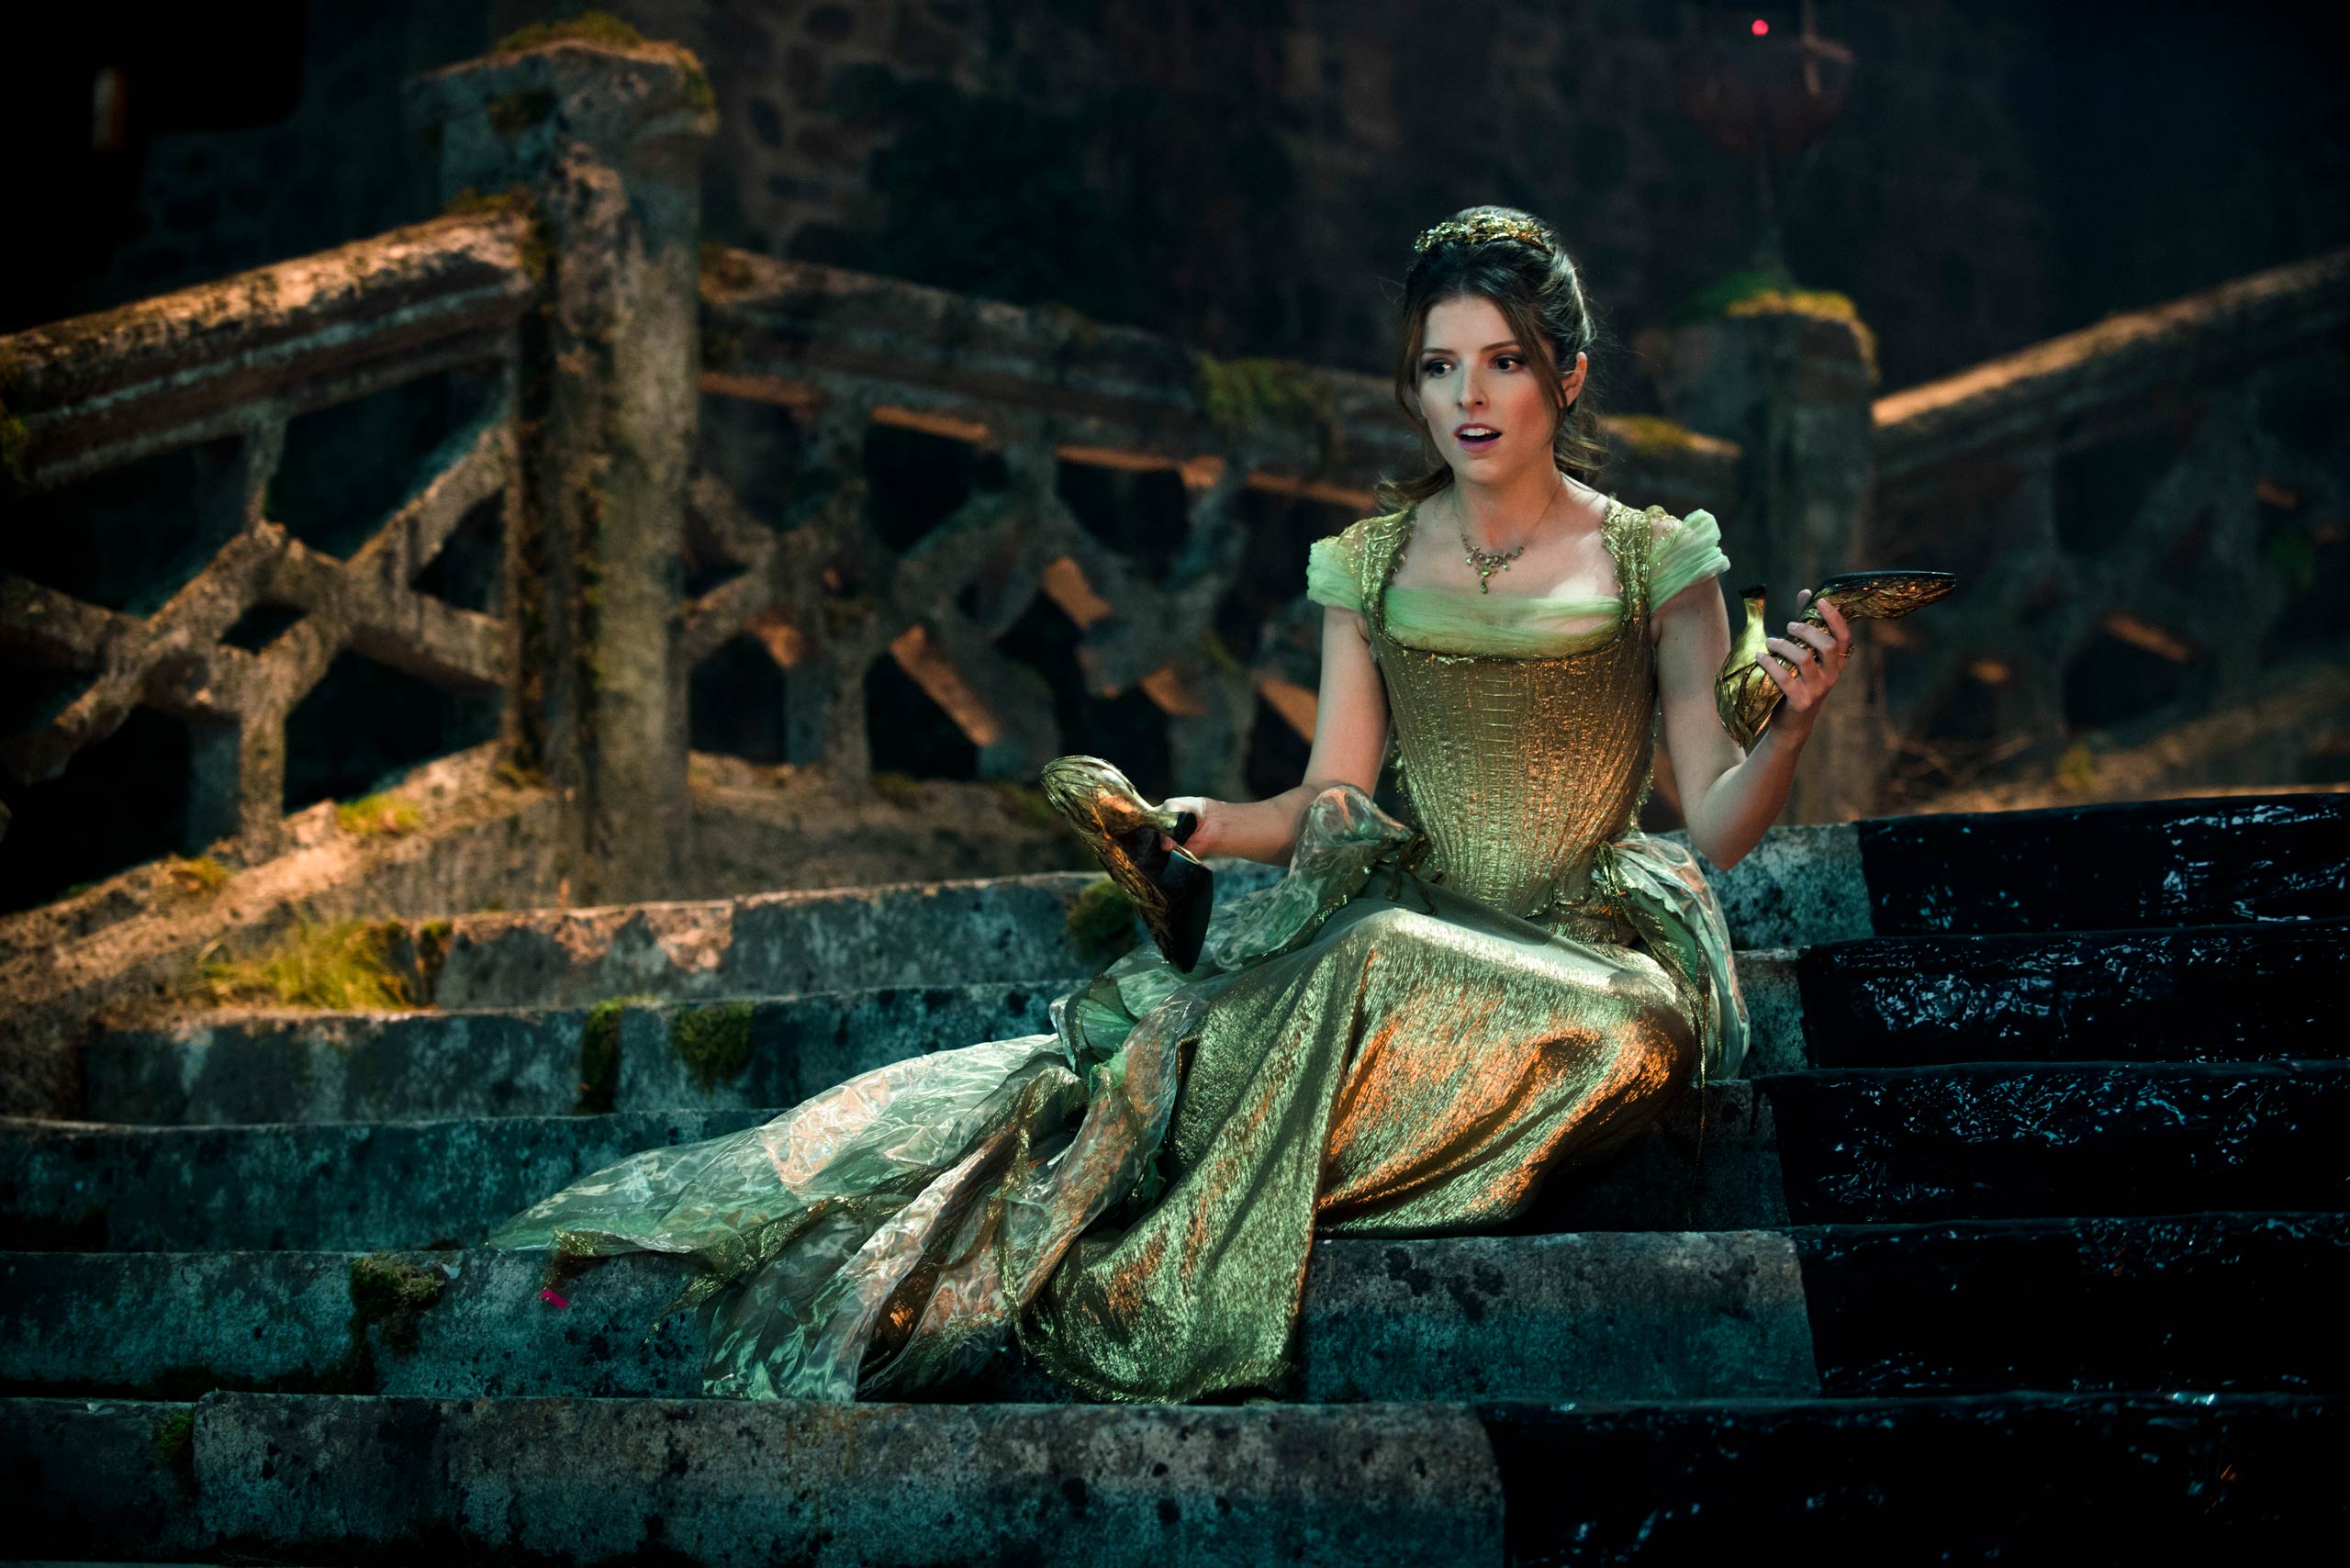 Anna Kendrick as Cinderella in Into the Woods, 2014